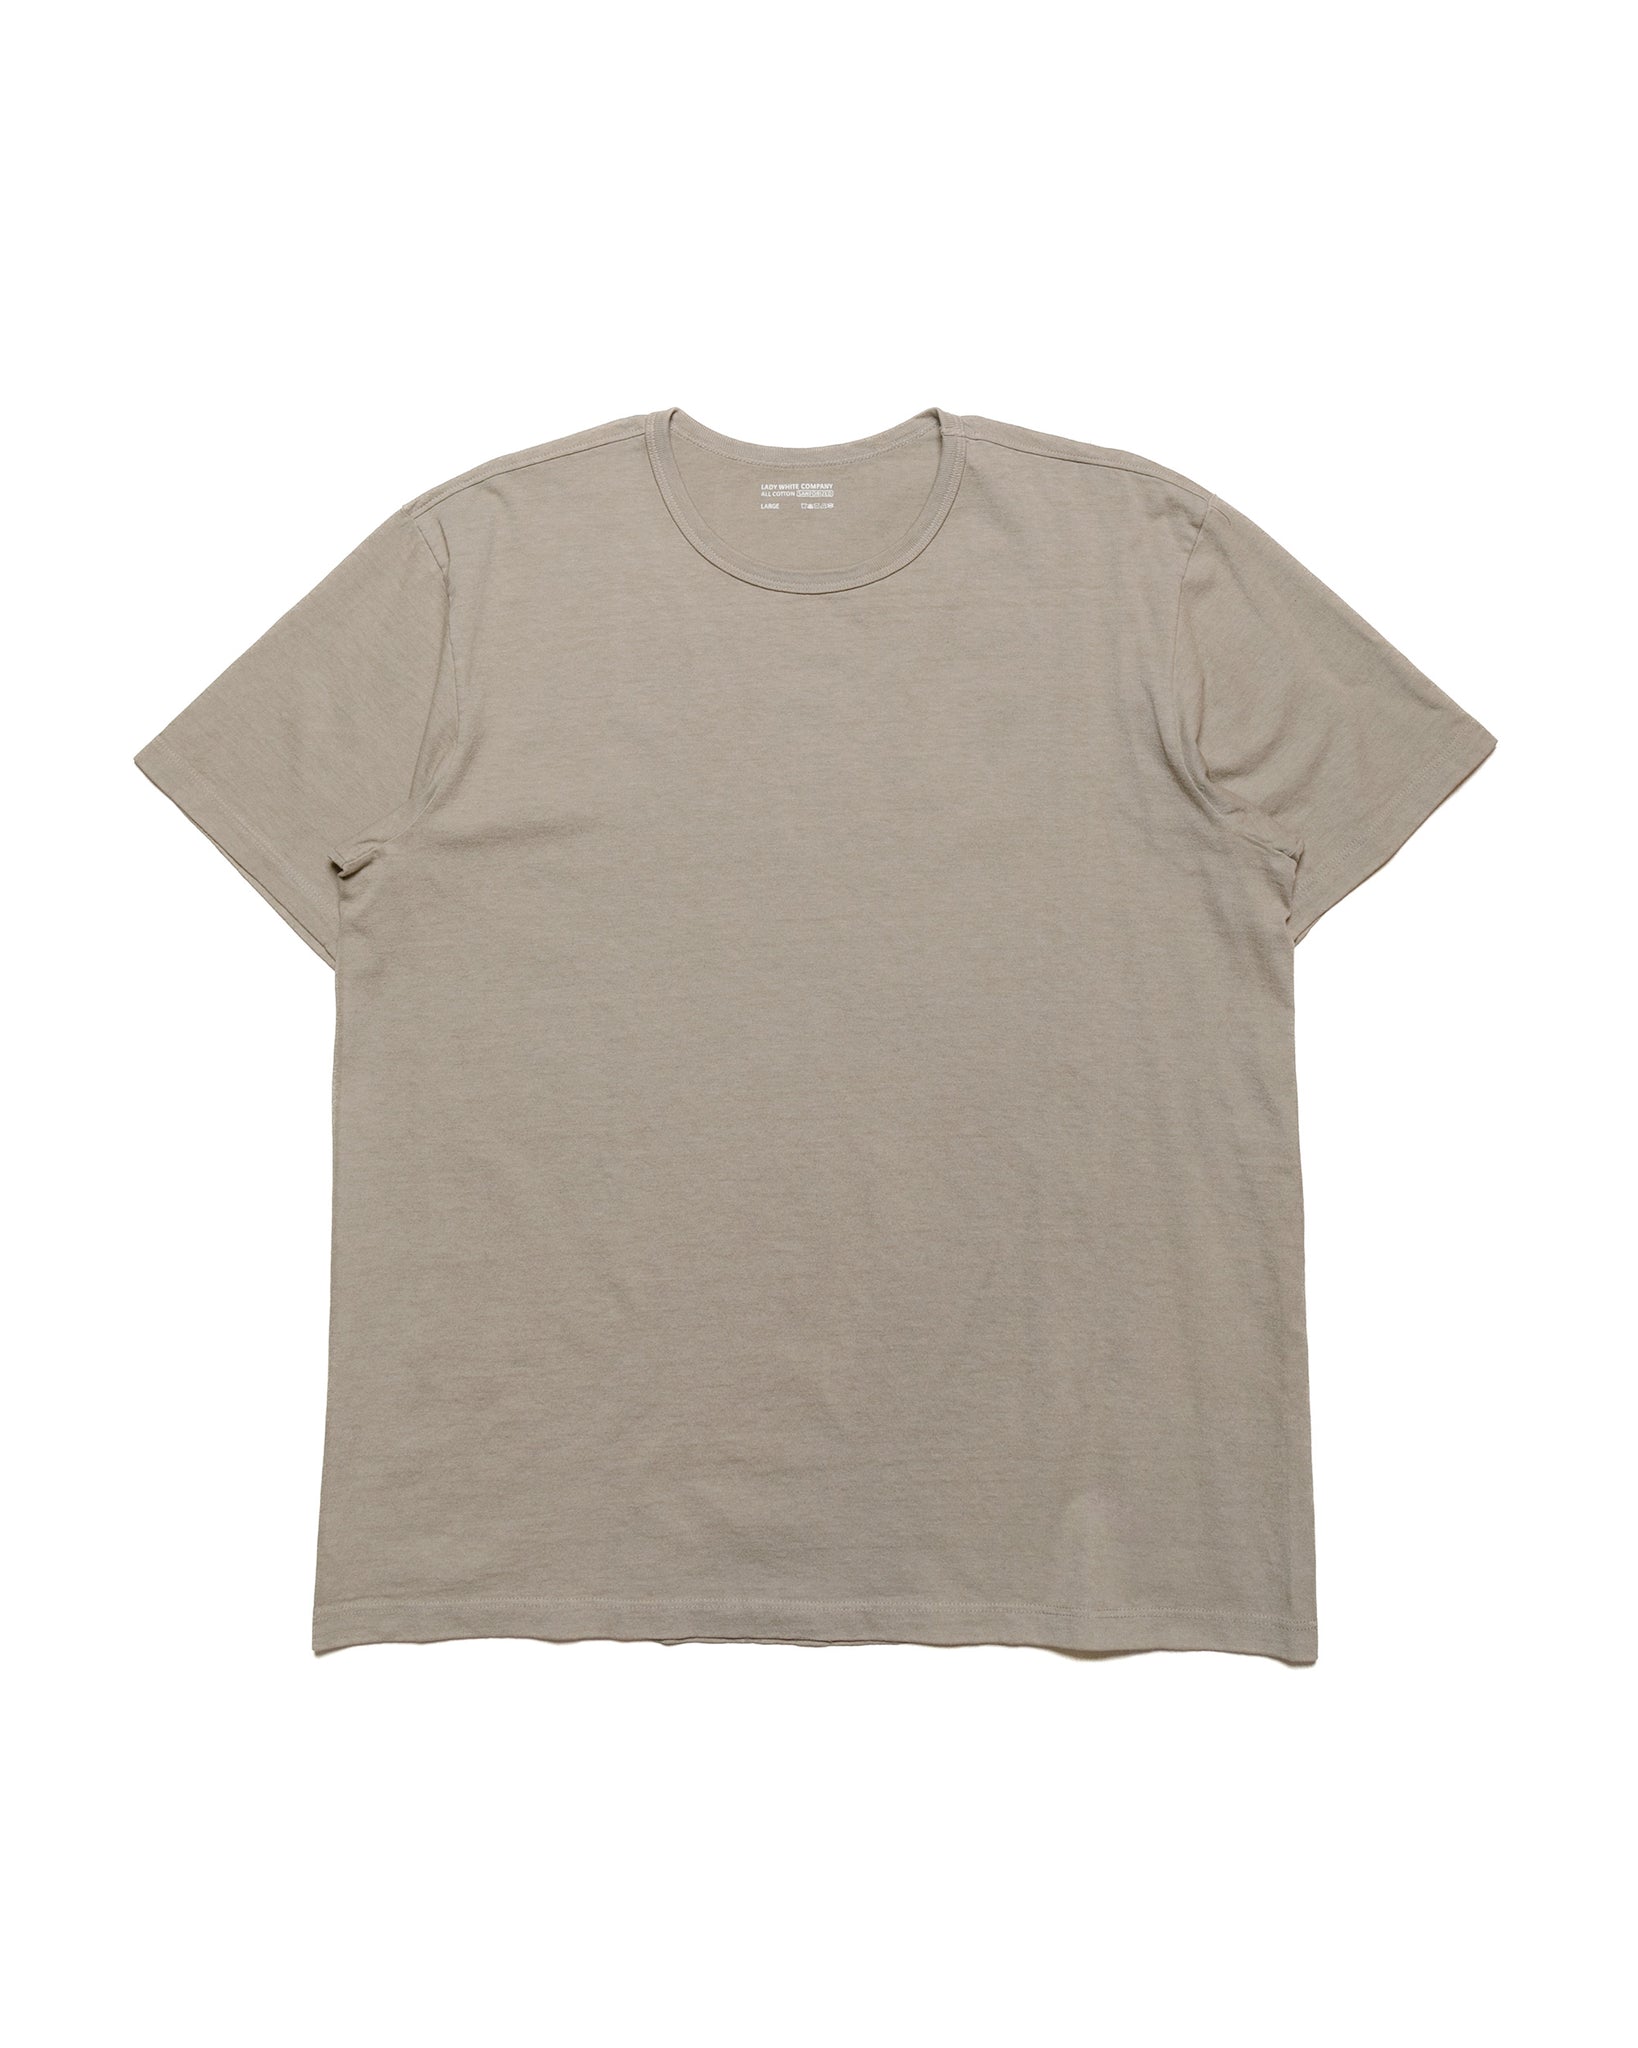 Lady White Co. T-Shirt 2-Pack Almond